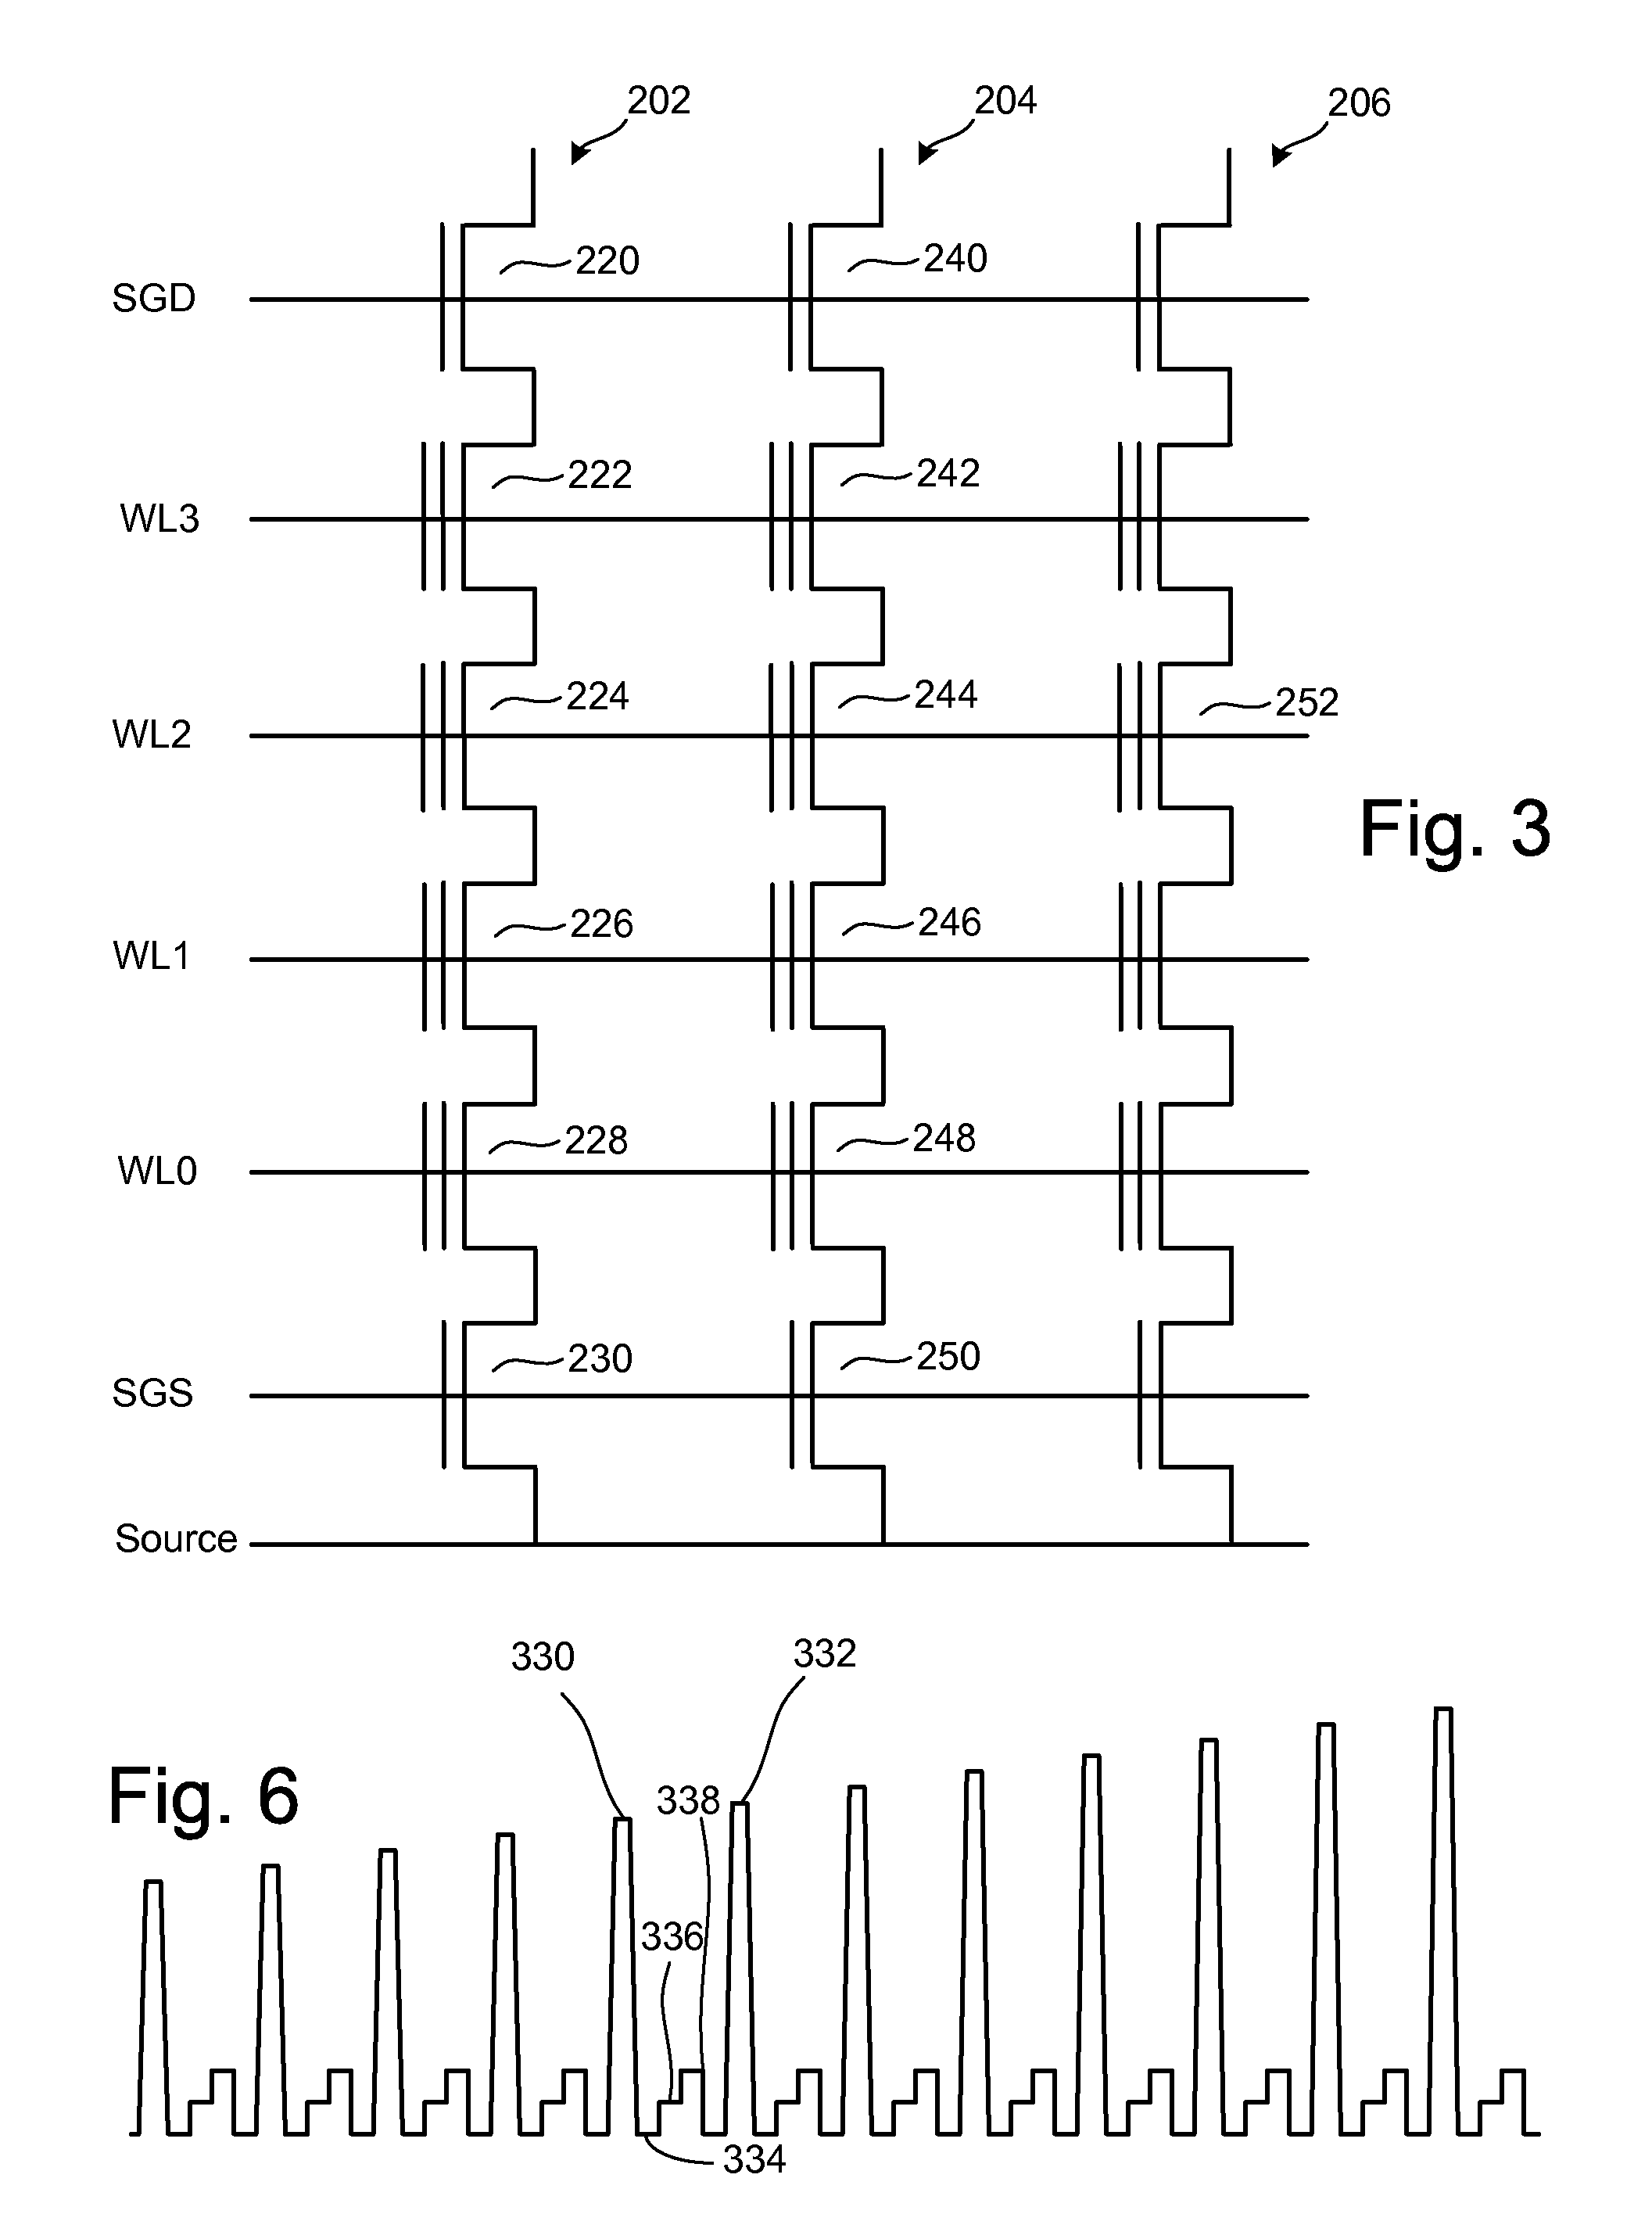 Programming Differently Sized Margins and Sensing with Compensations at Select States for Improved Read Operations in Non-Volatile Memory